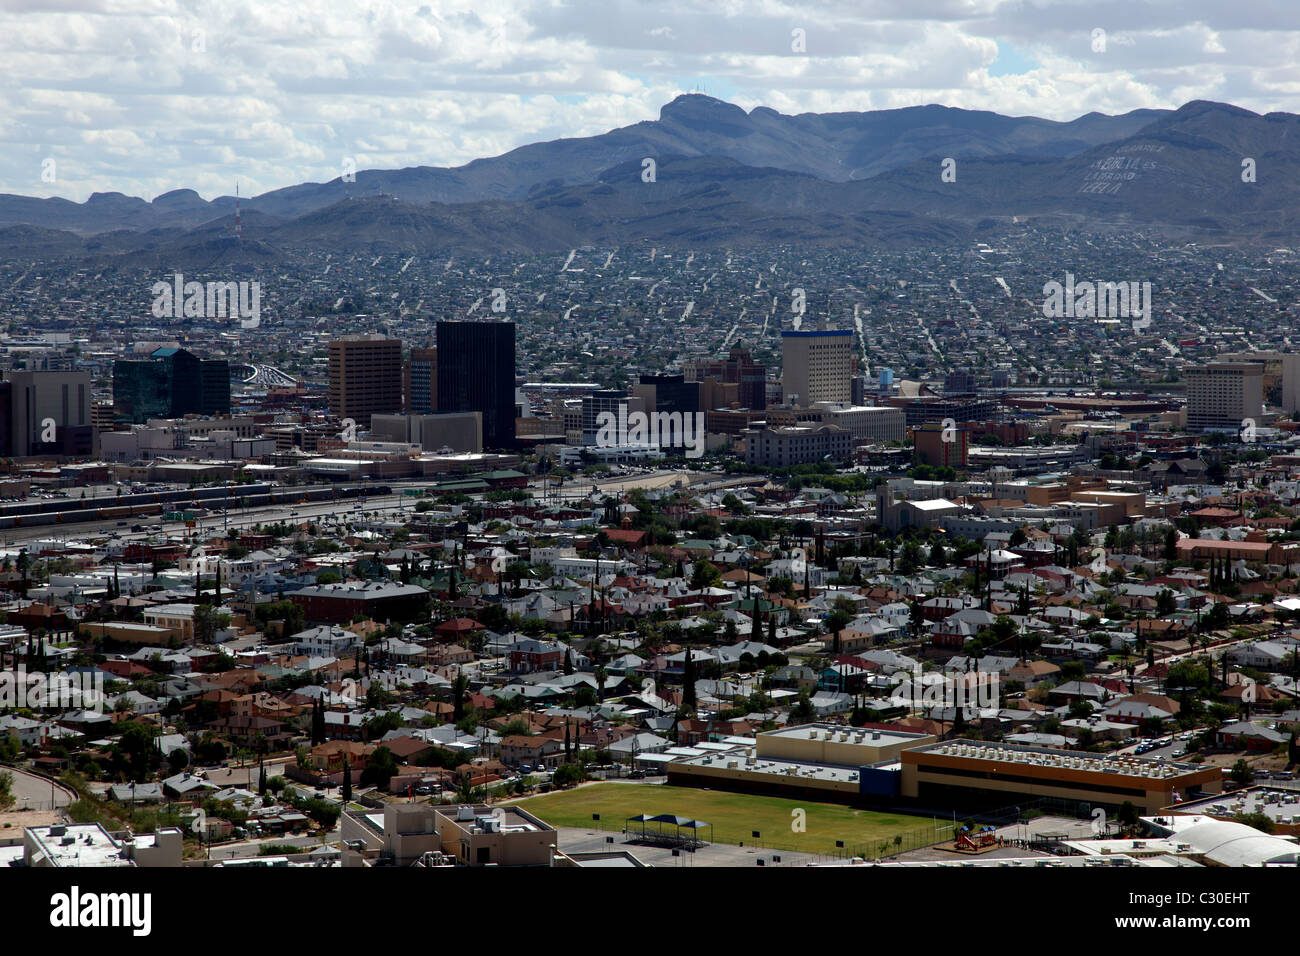 The downtown of El Paso, Texas from a scenic overlook.  Juarez, Mexico is just beyond the buildings of the city. Stock Photo